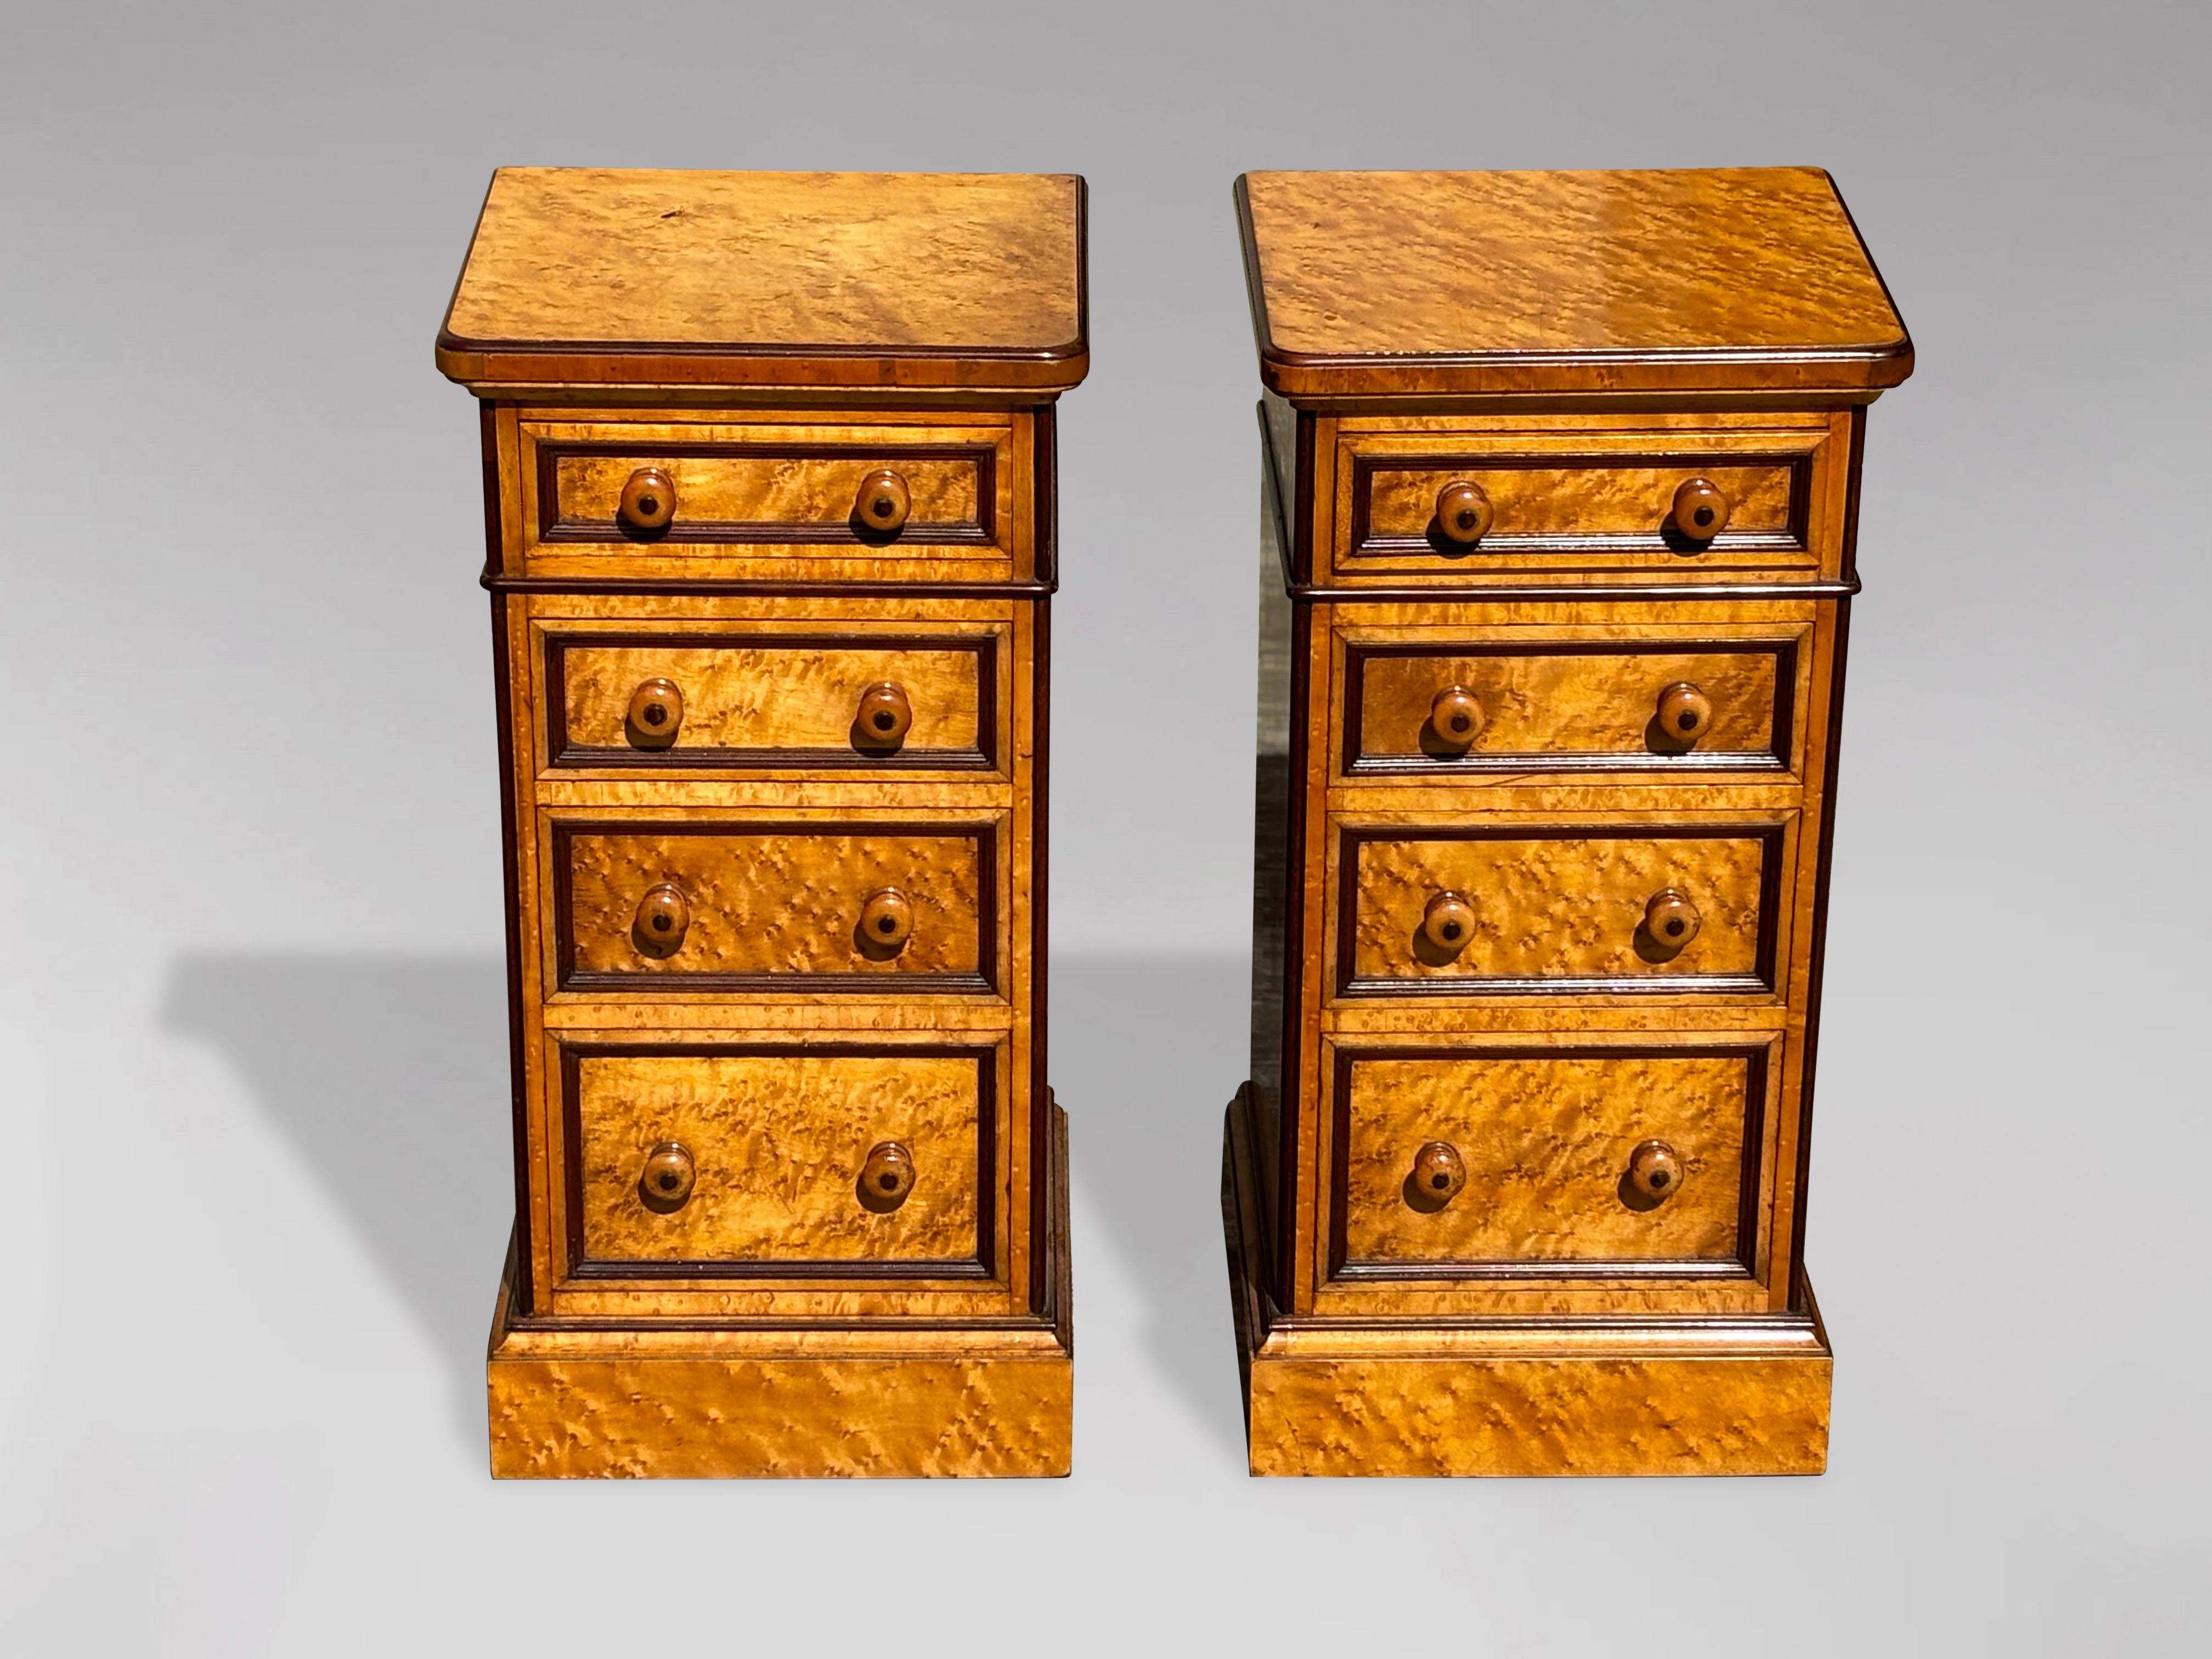 British Pair of 19th Century Victorian Period Bedside Chests in Birdseye Maple For Sale